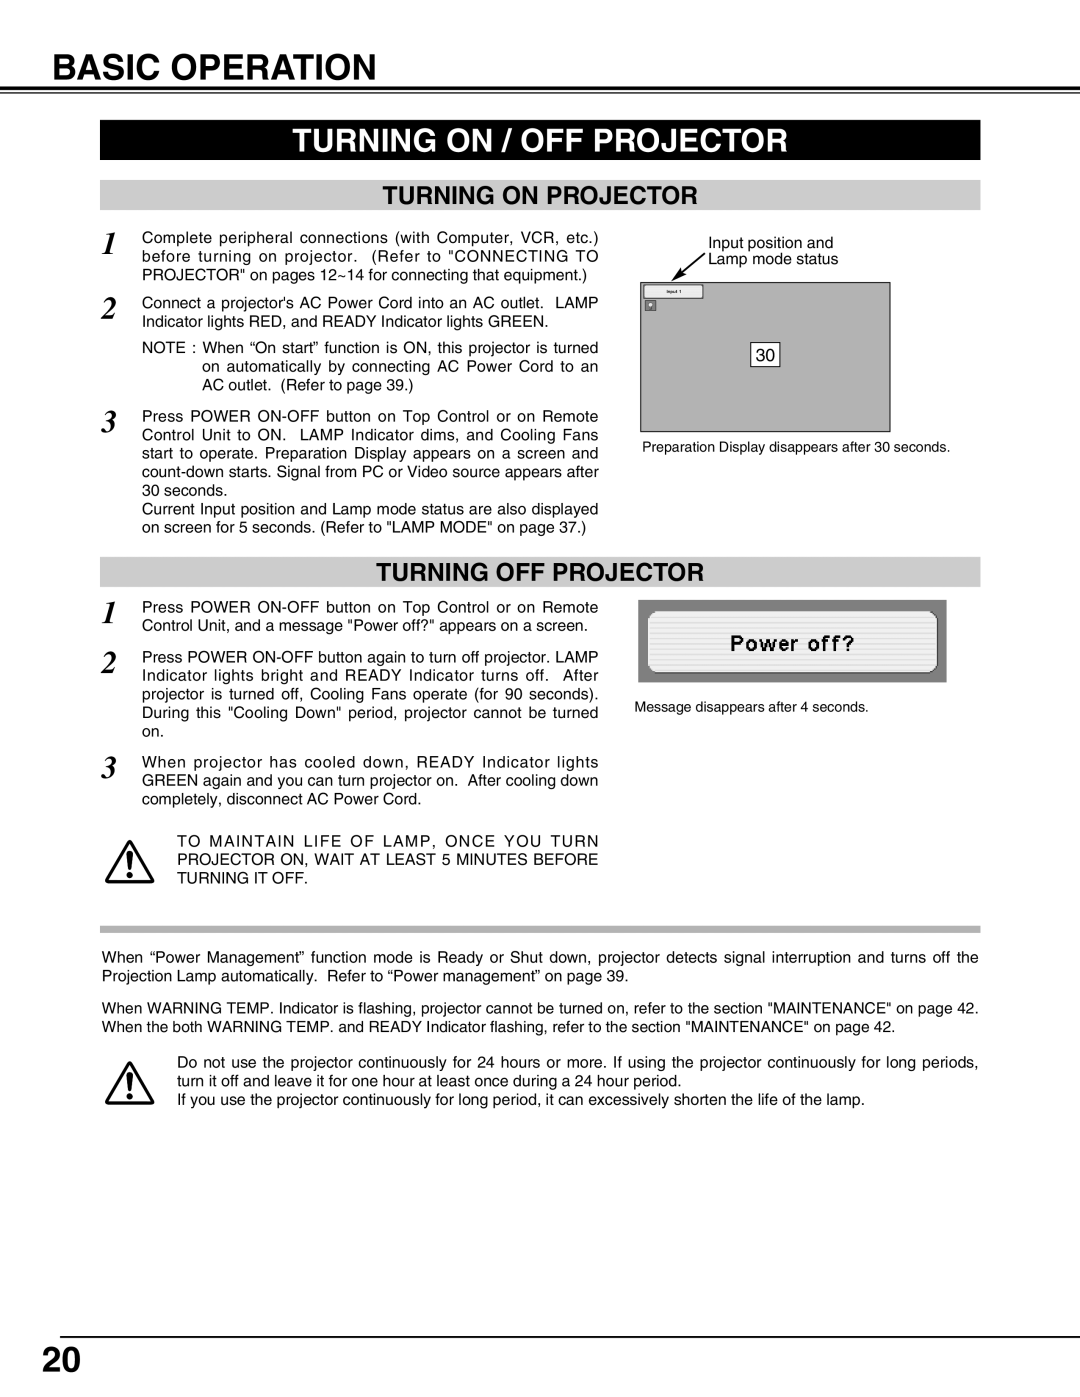 Eiki LC-X60 instruction manual Basic Operation, Turning On / Off Projector, Turning On Projector, Turning Off Projector 